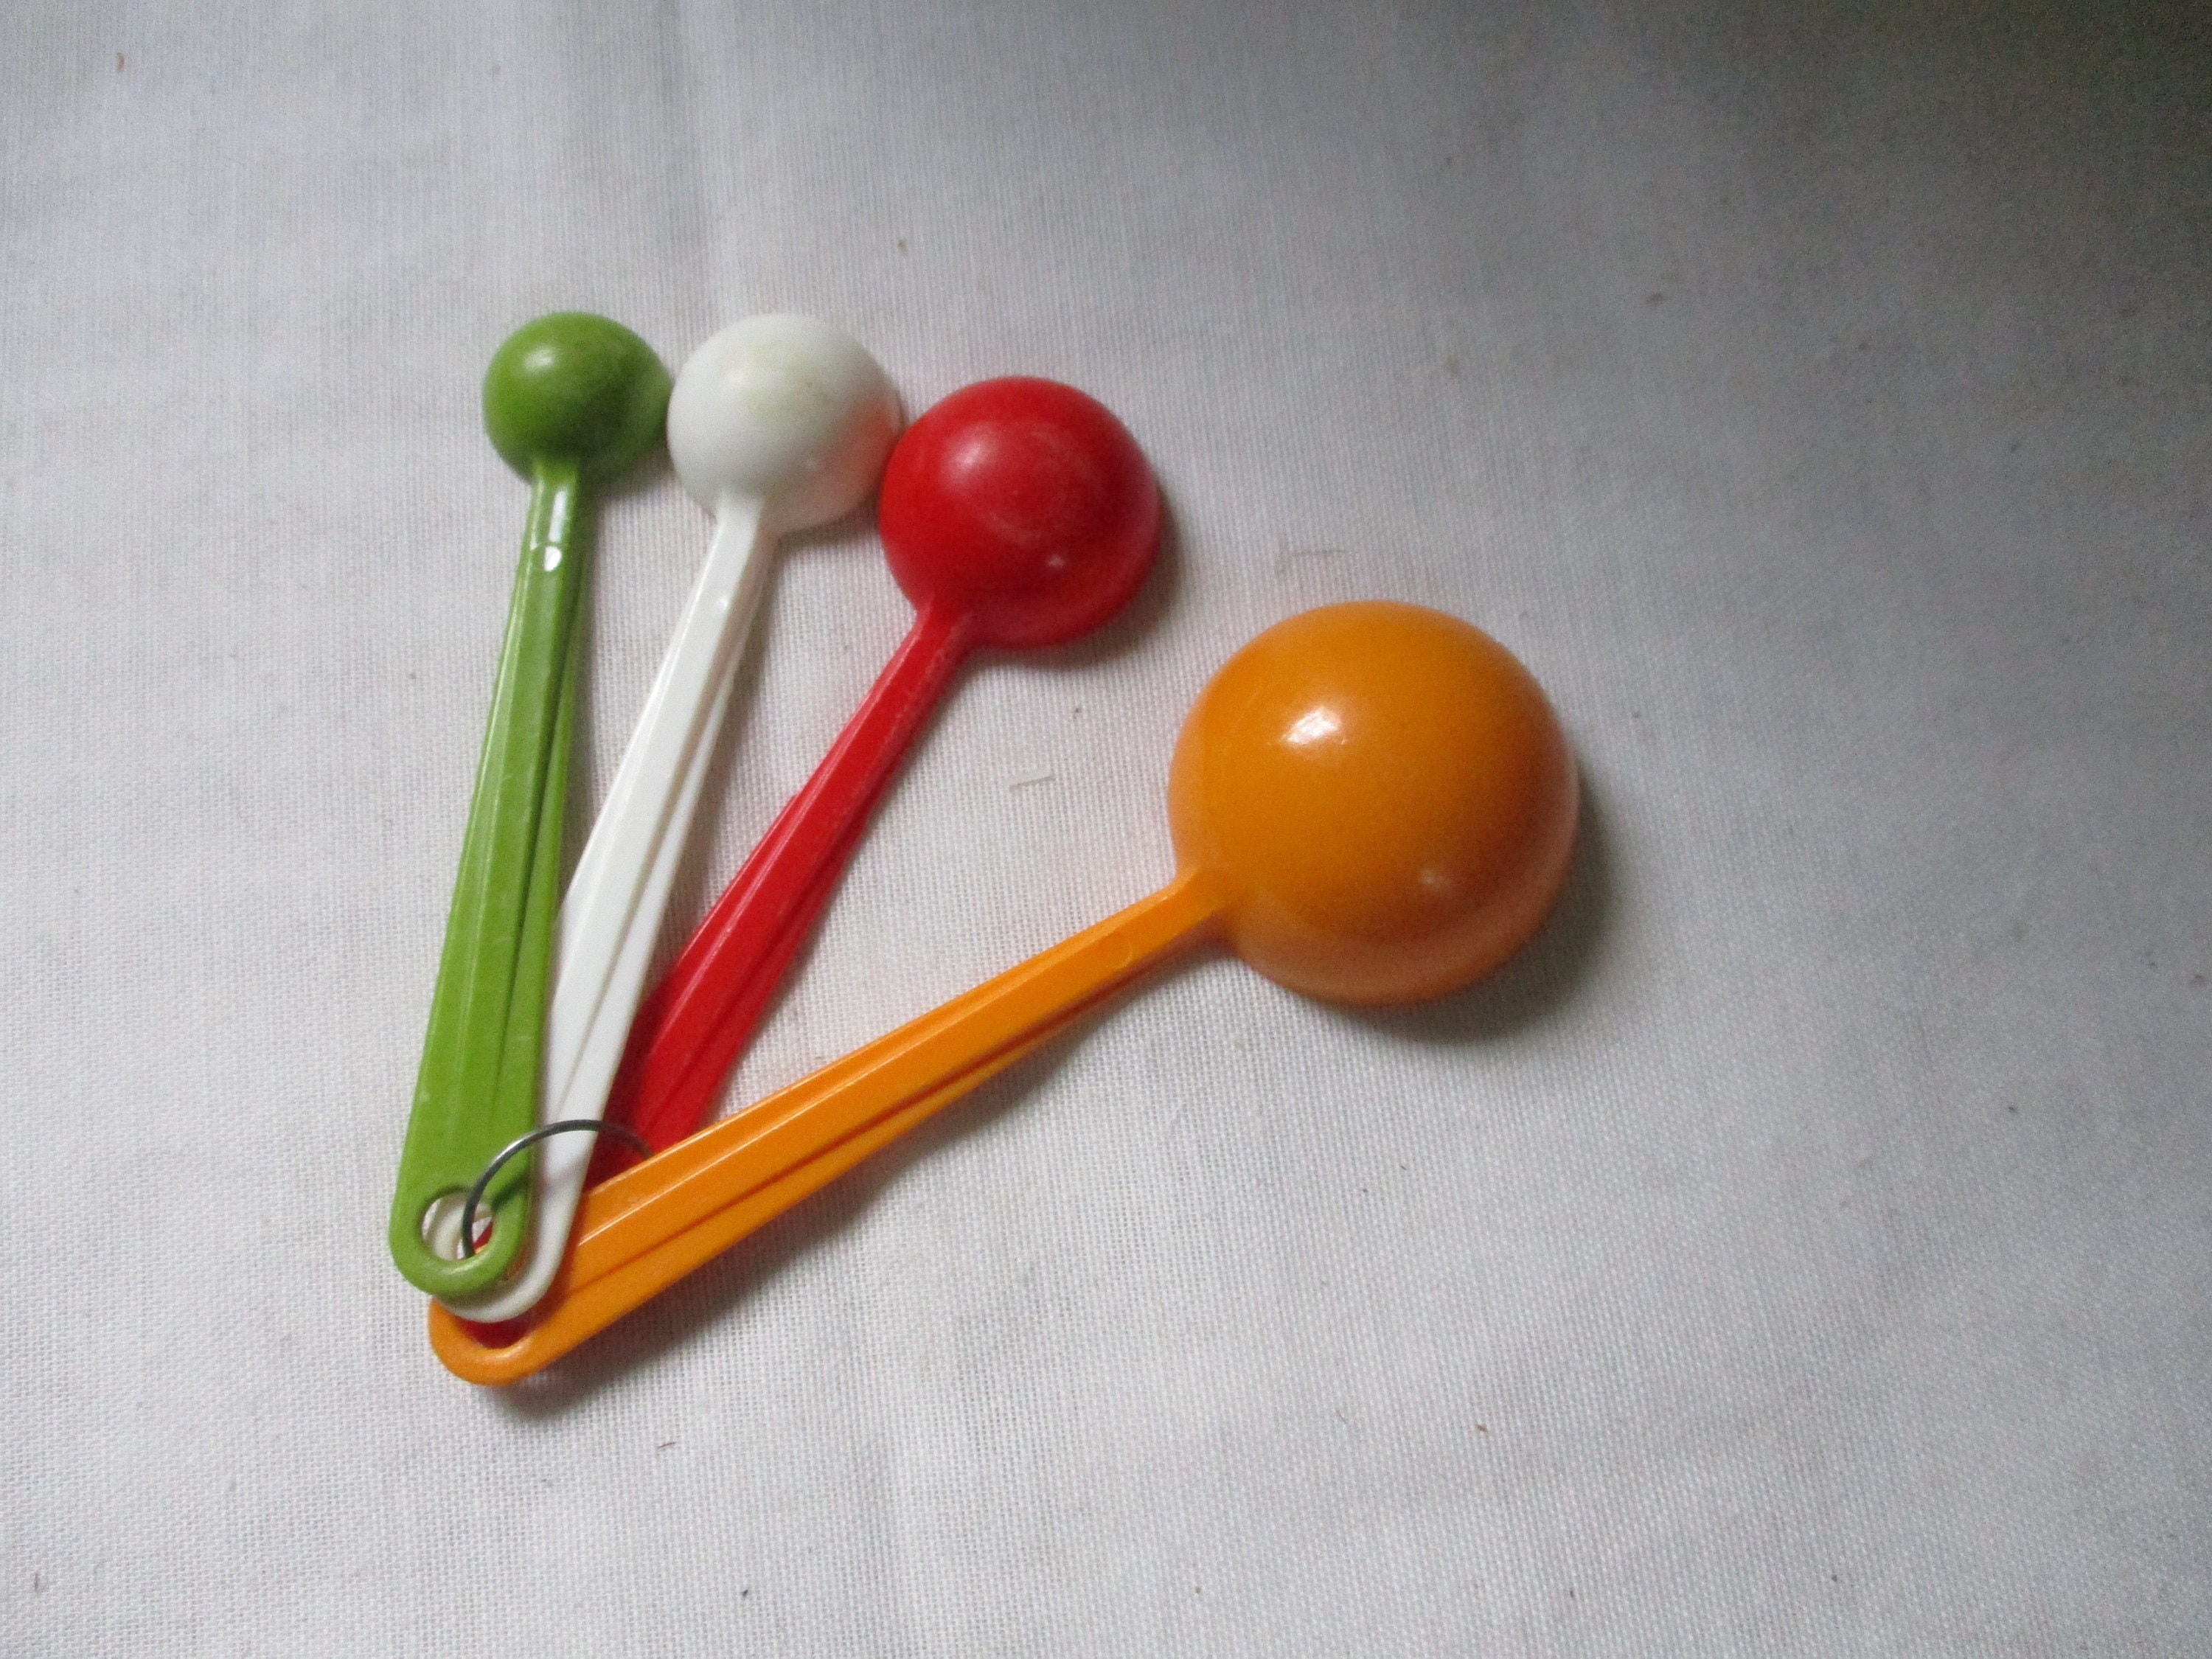 Retro Plastic Measuring Spoons, Orange, Red, White and Green Plastic. 1  TBLE, 1 Teaspoon, 1 Third and 1 Fourth. 